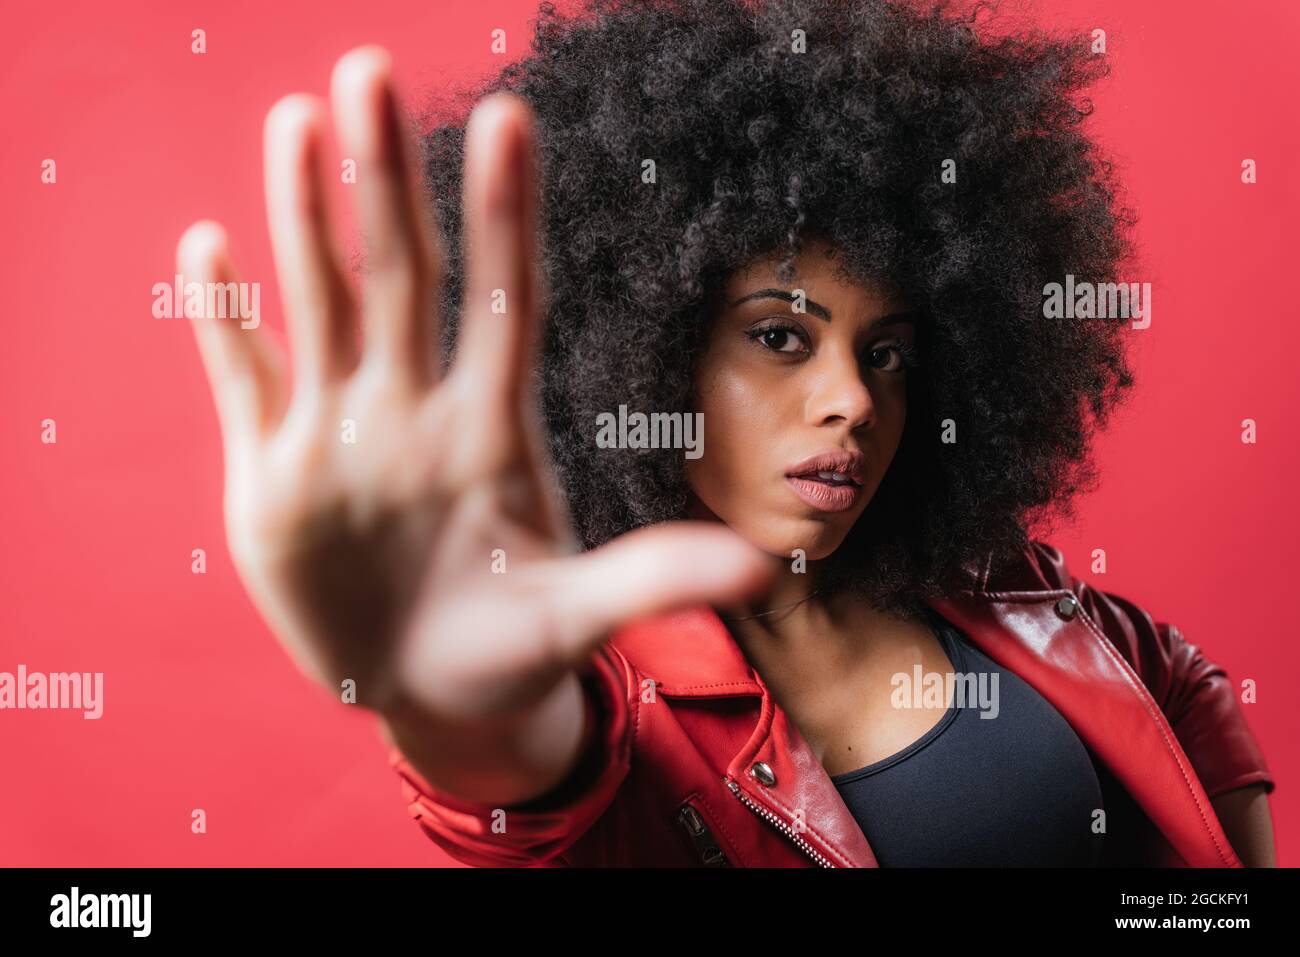 Frightened African American female with curly hair showing stop gesture on red background in studio and looking at camera Stock Photo